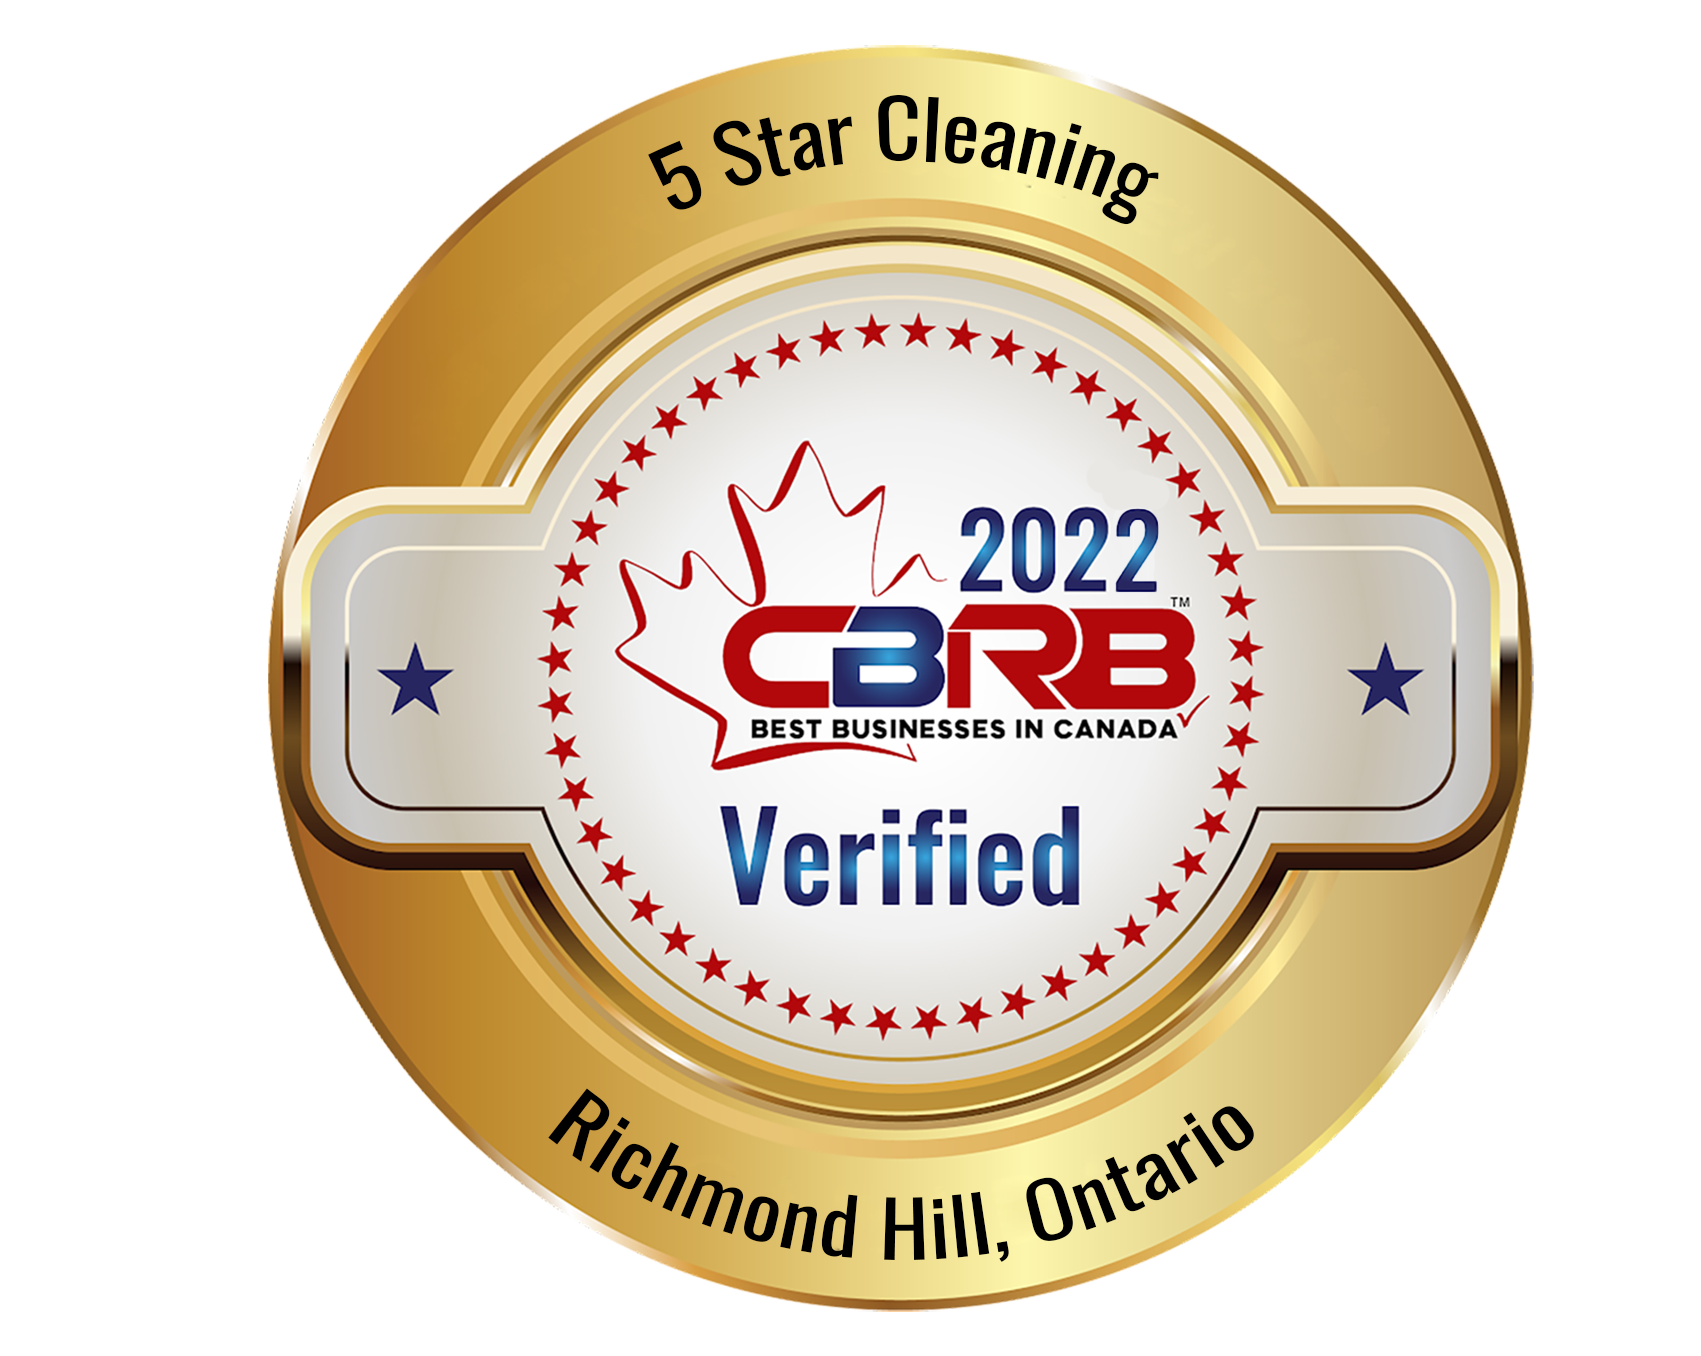 2022 CBRB Inc 5 Star Cleaning Badge (1)